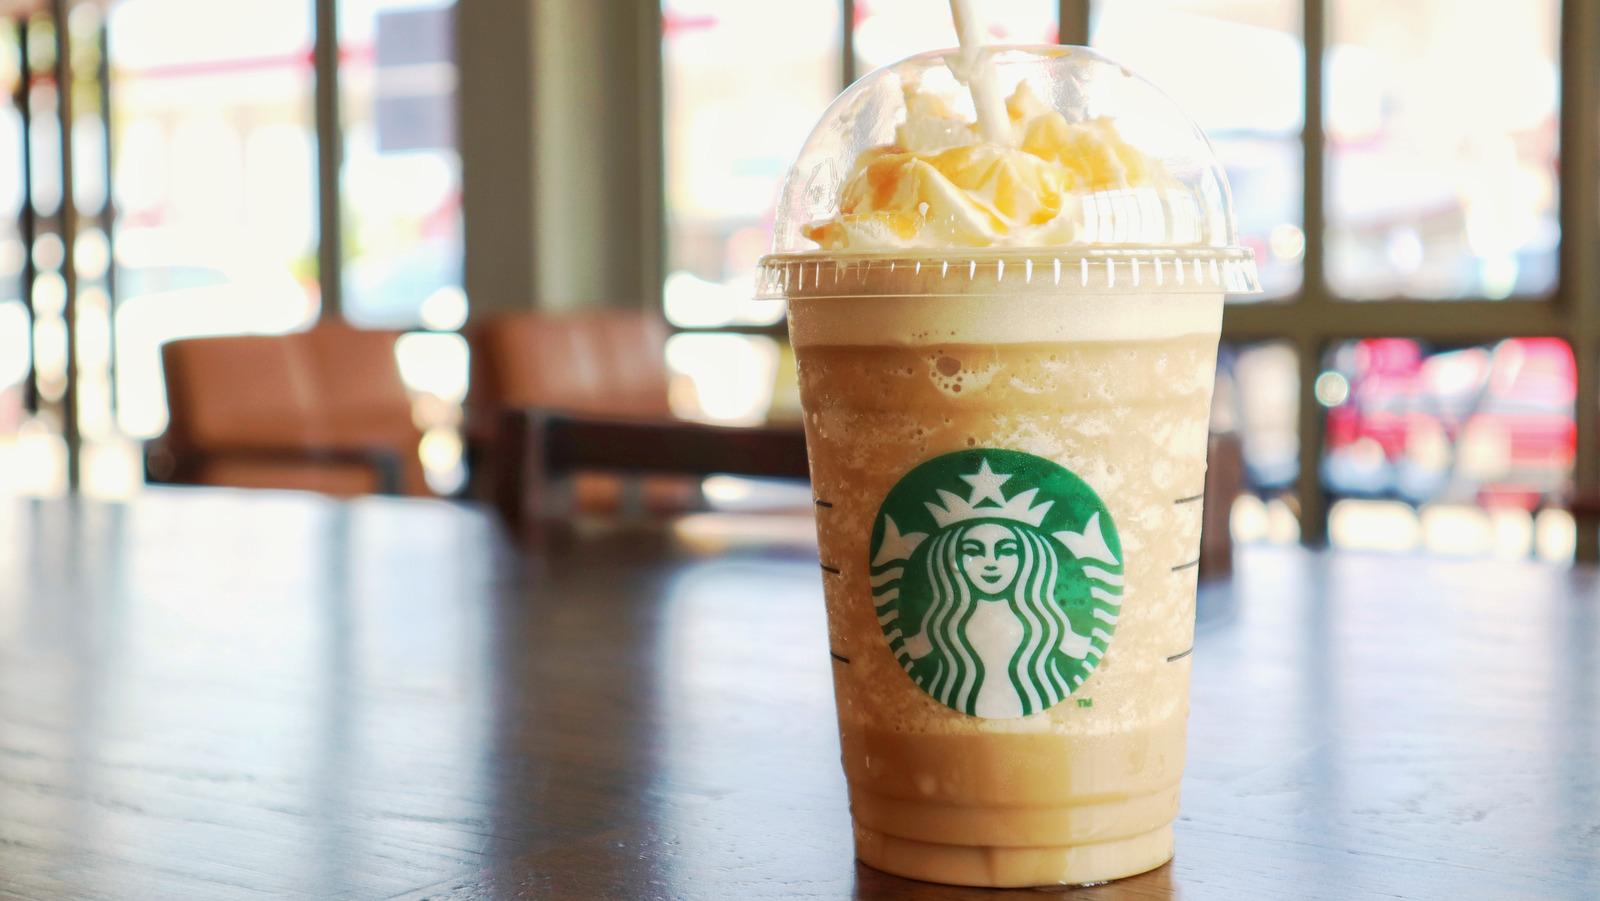 How many calories are in a caramel frappe at Starbucks?